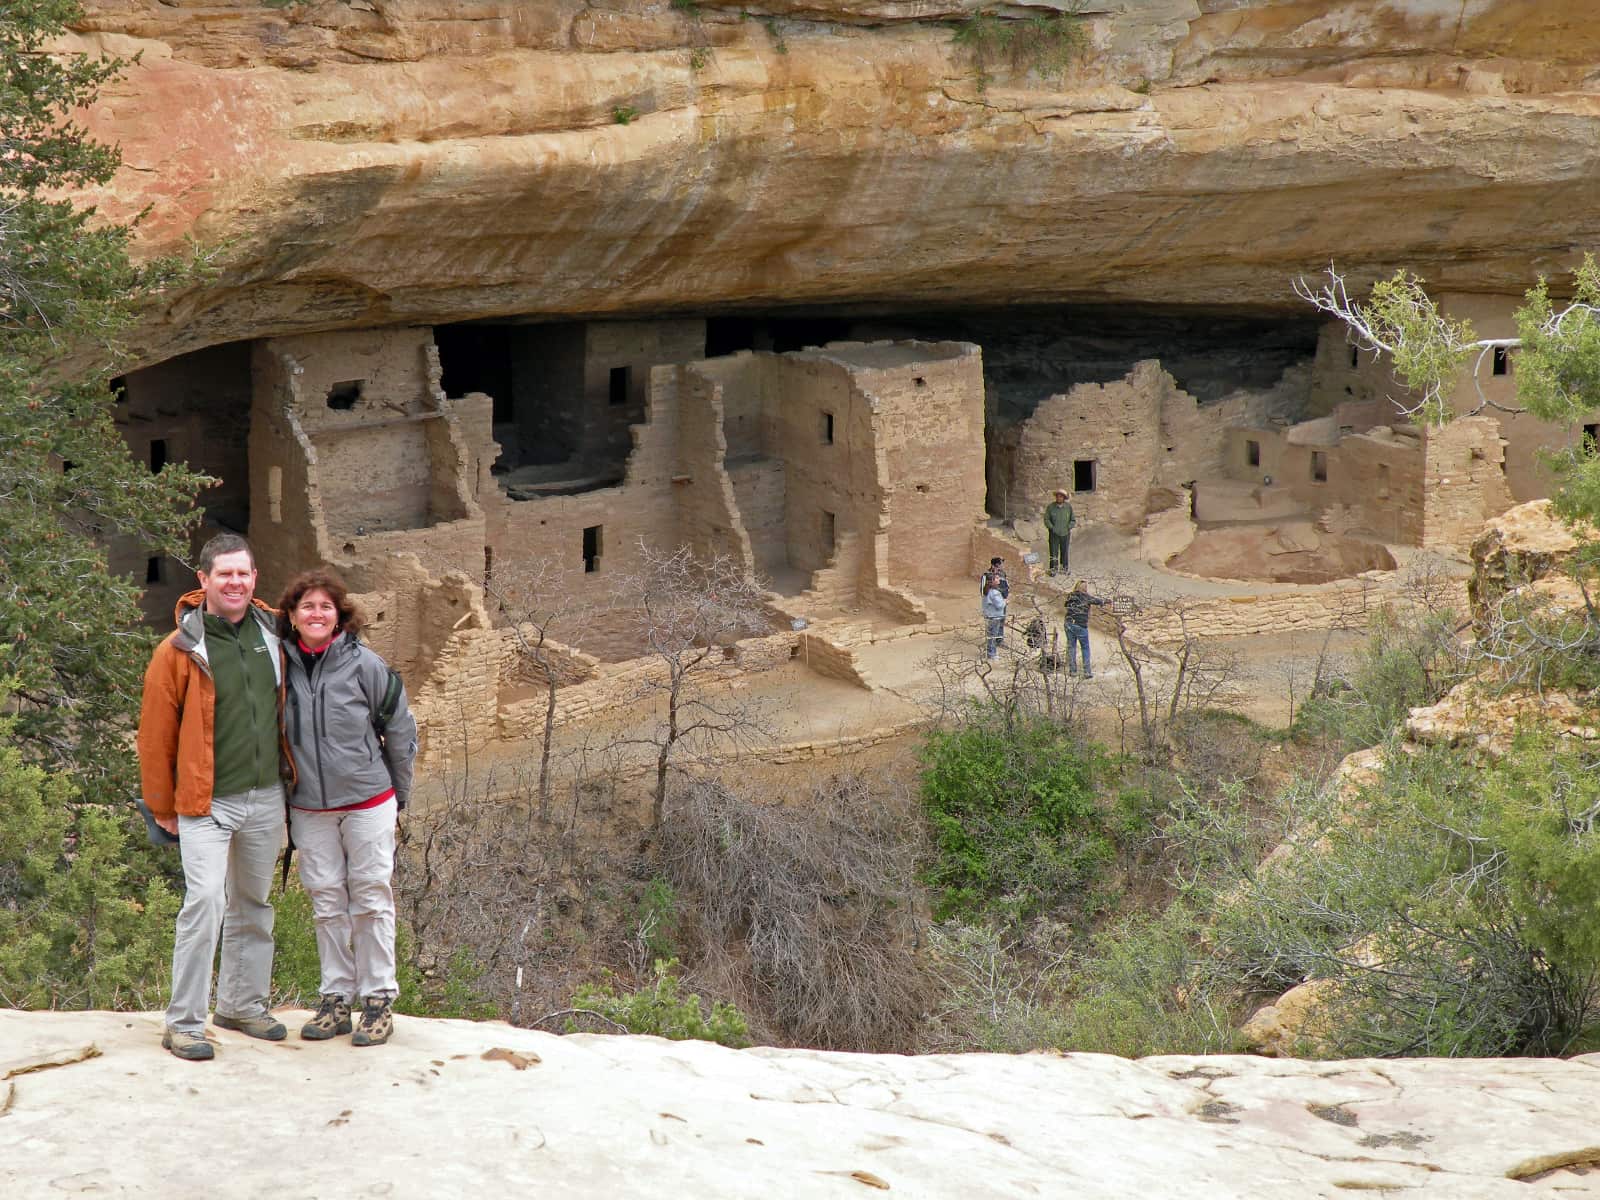 Man and woman standing in foreground with indigenous dwelling in background